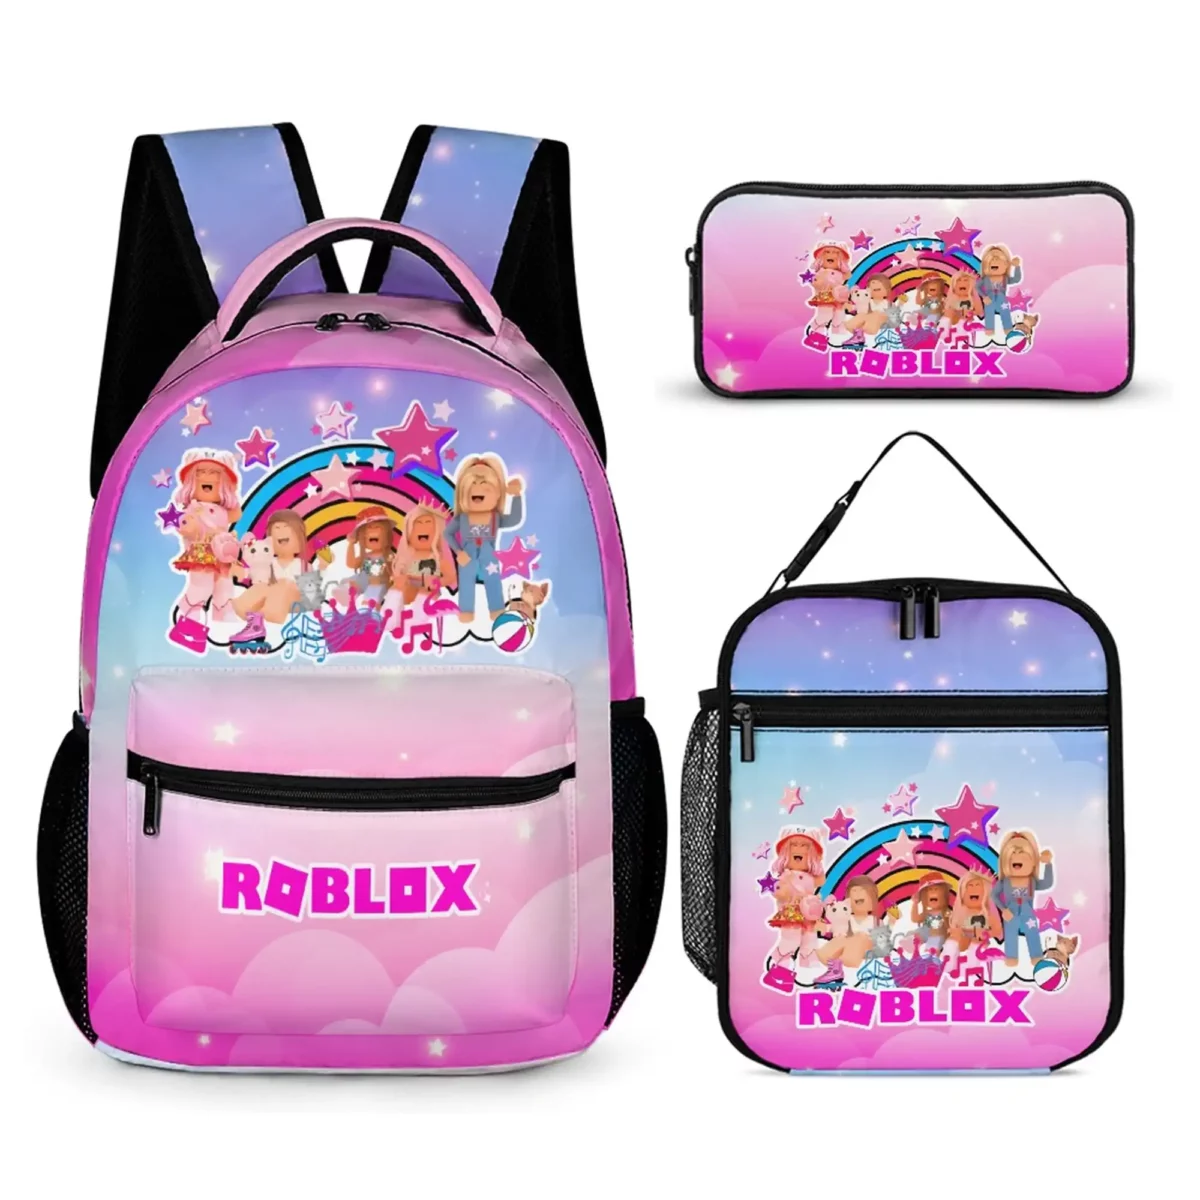 Customizable Roblox Girl backpack, lunch bag and pencil case package | Back to School combo Cool Kiddo 20